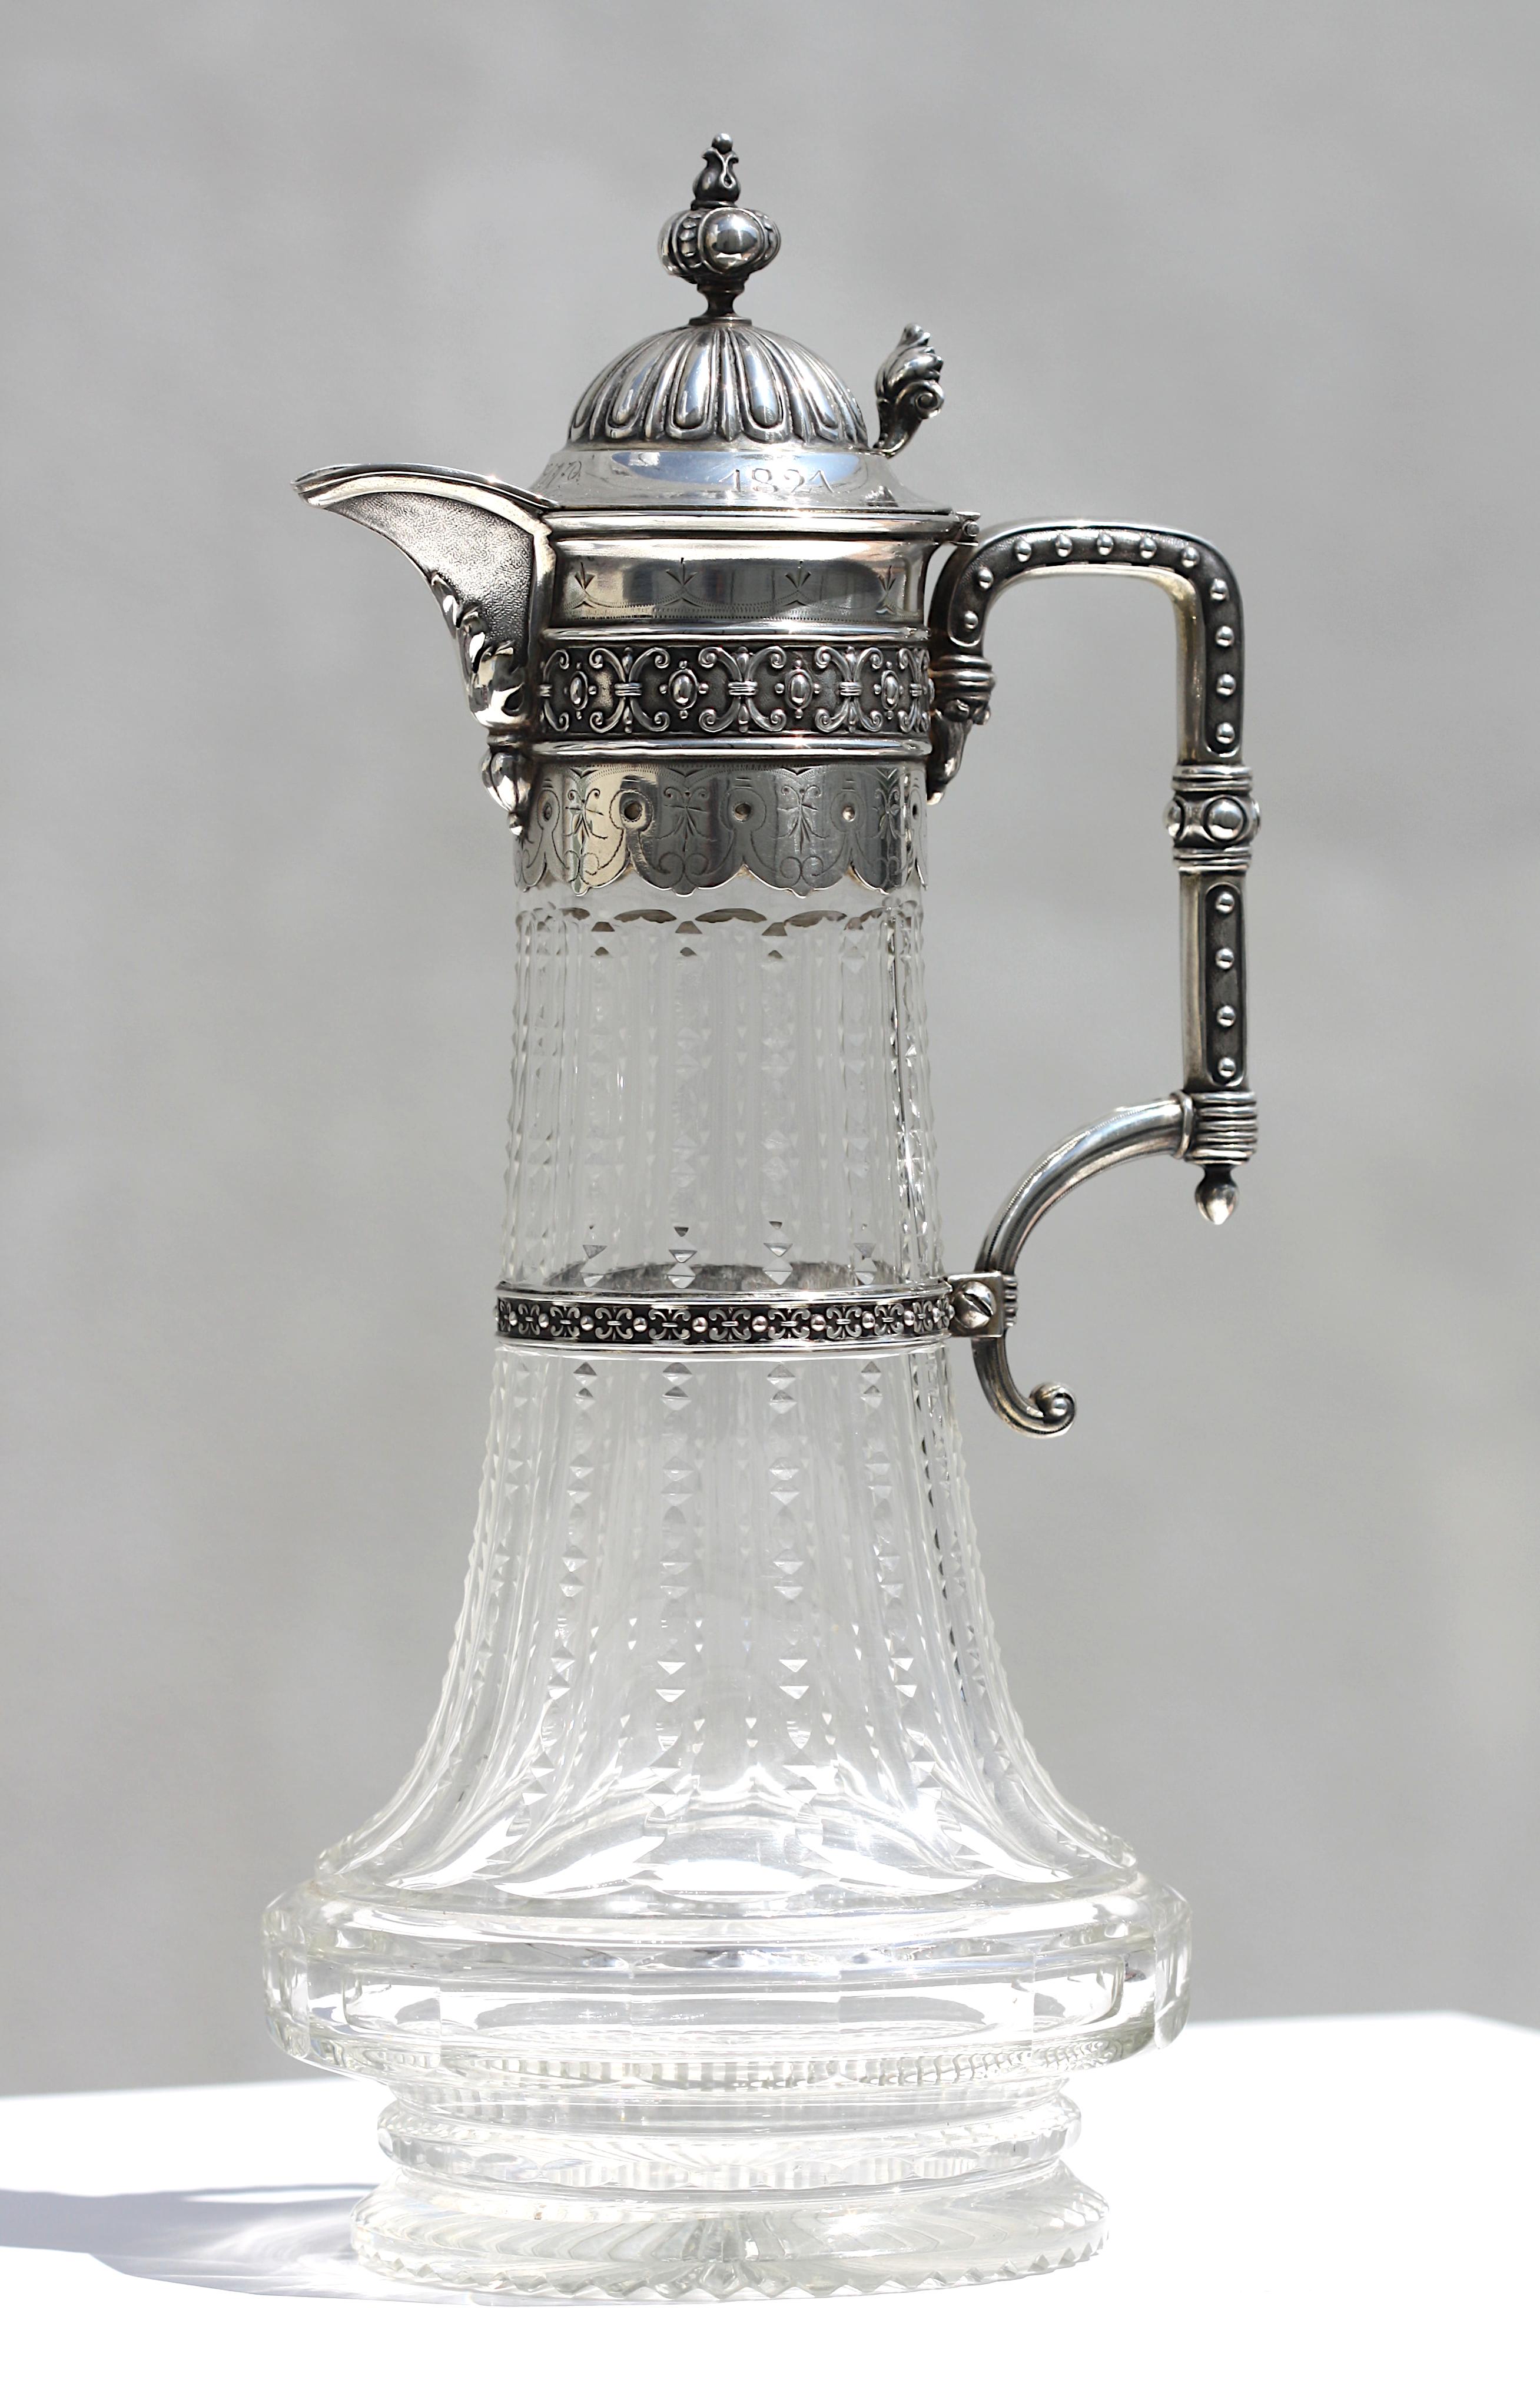 
Continental Silver-Mounted Cut-Glass Wine Carafe
German/Austrian, 1st quarter thru last quarter, 19th Century, marked with a crown before 800, followed by an indistinct symbol, inscribed d. Aug.26, 1821, and monogramed, on the lid.
The faceted-cut